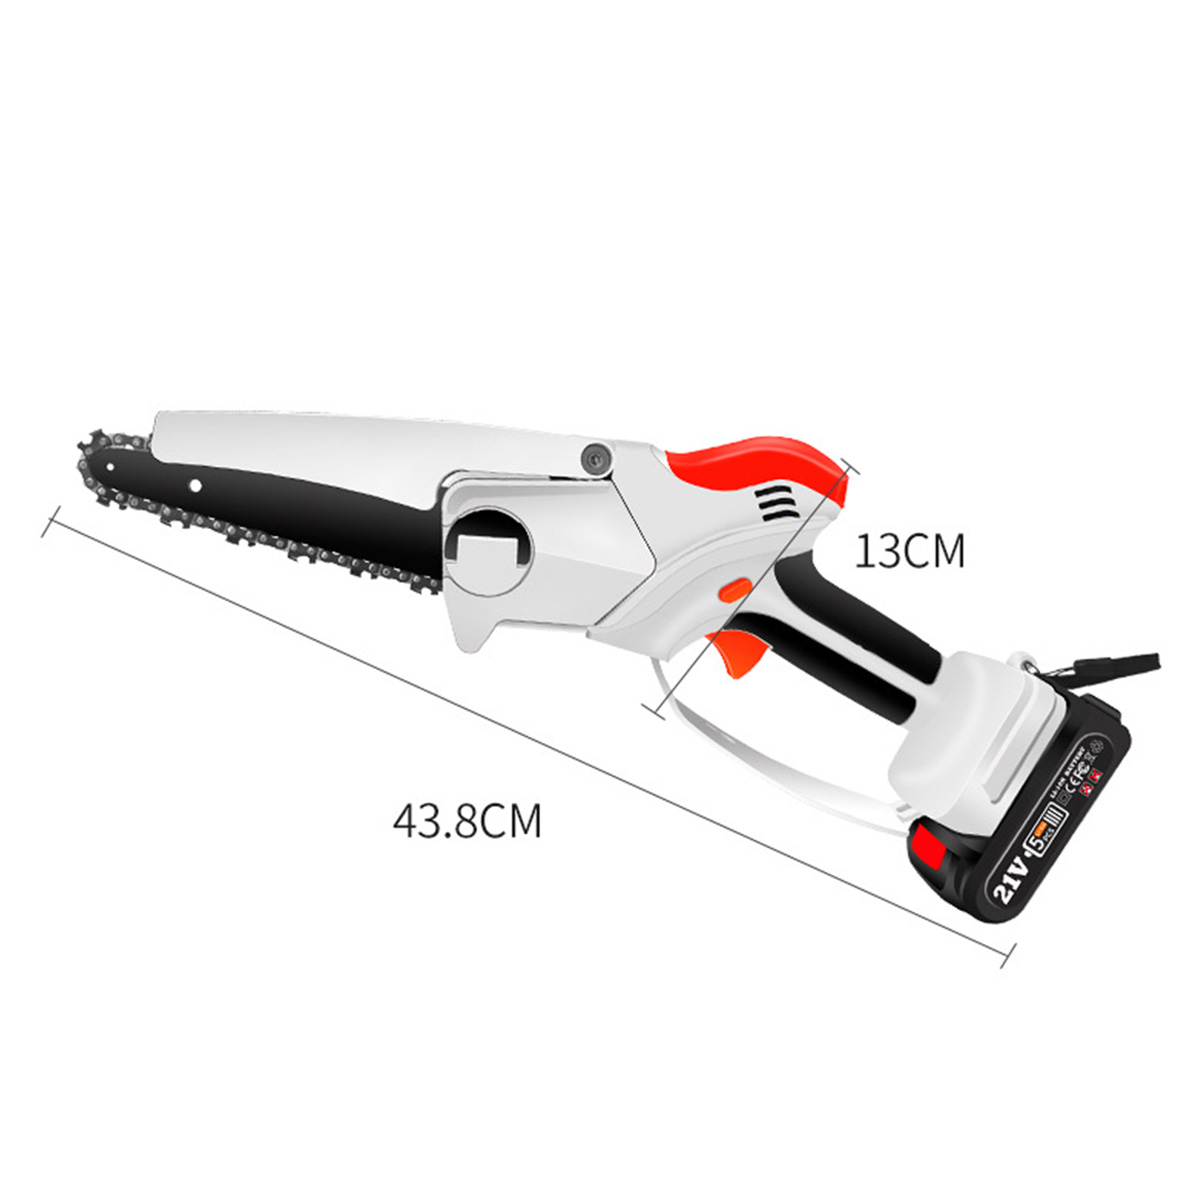 6-Inch-Portable-Electric-Chain-Saw-Mini-Cordless-Rechargeable-Woodworking-Wood-Cutting-Tool-W-12-Bat-1886164-15